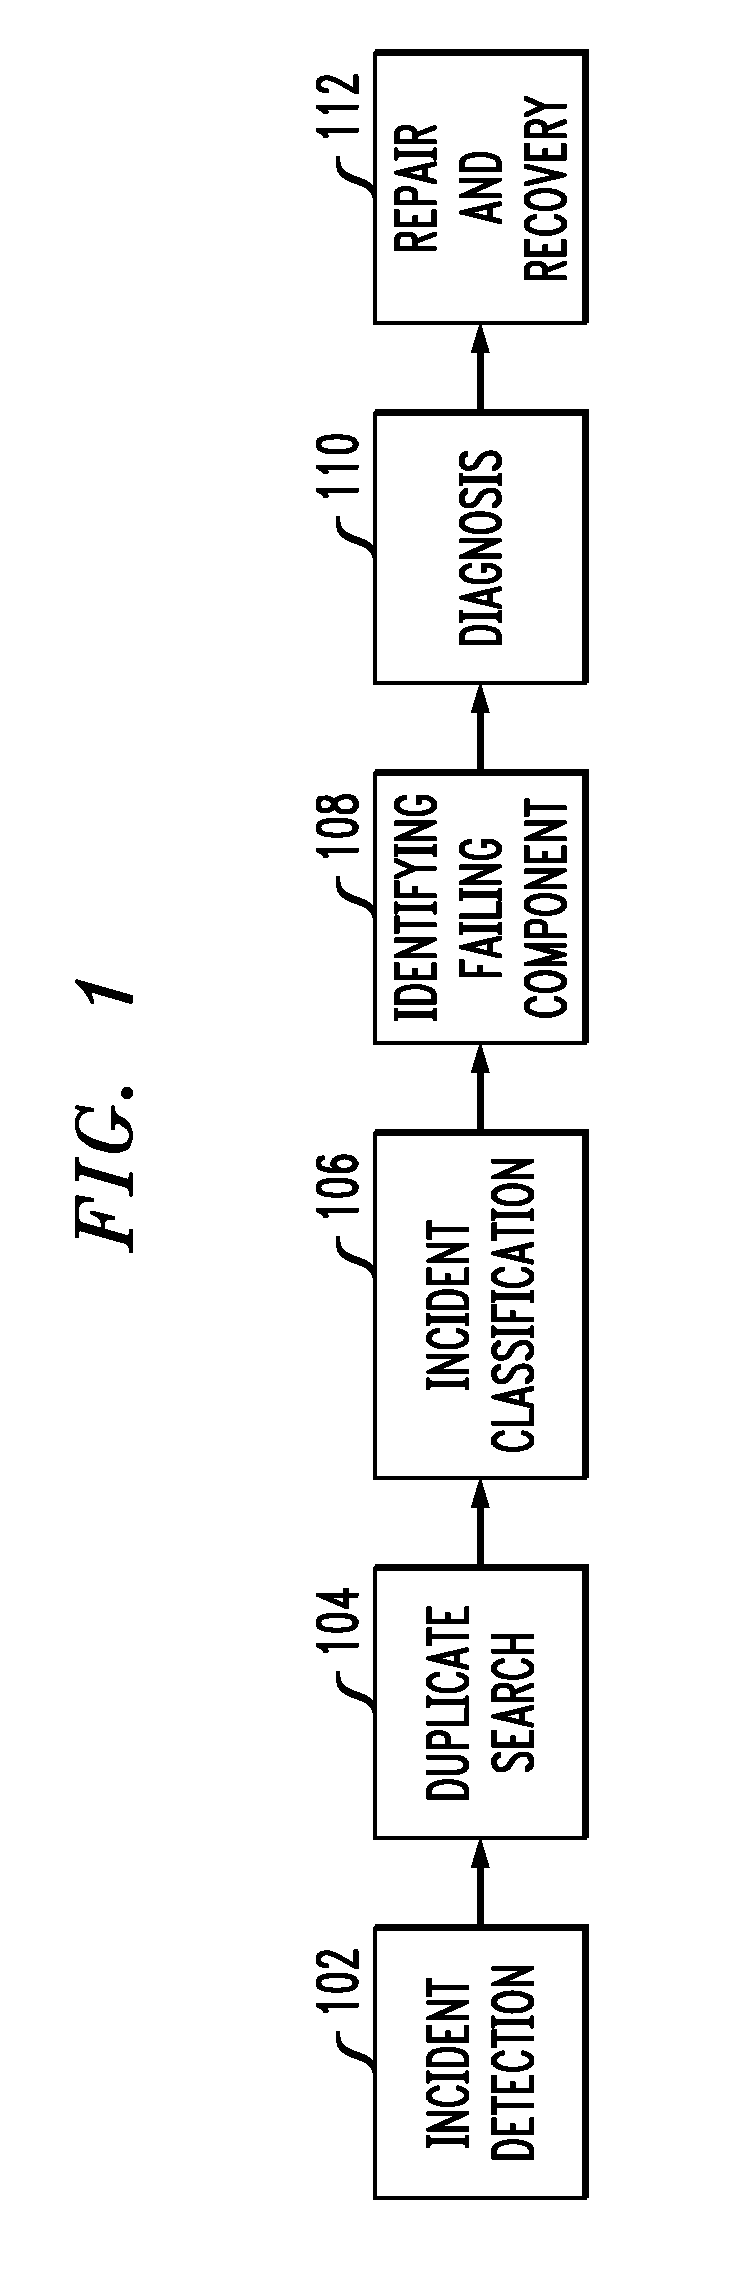 Method for associating configuration items to incidents